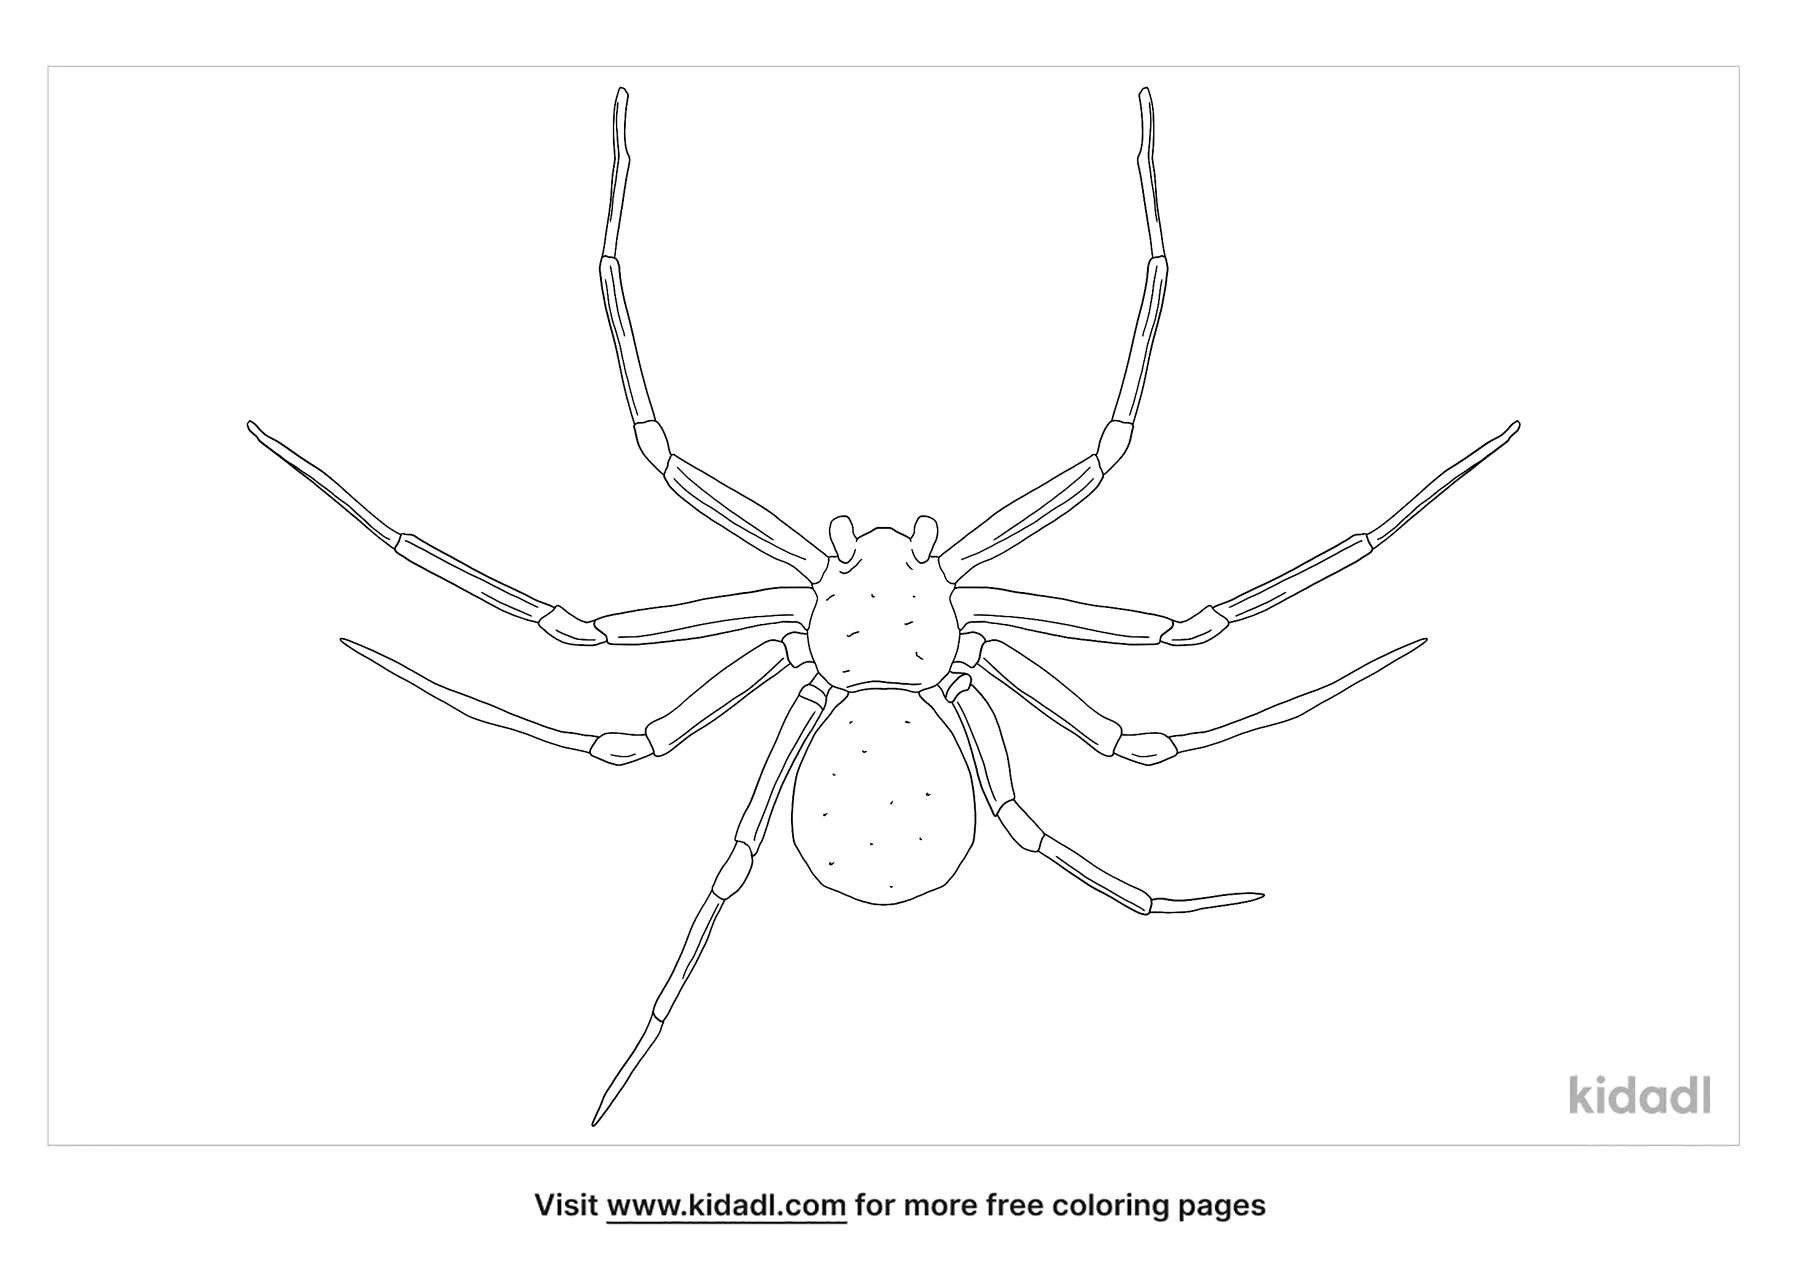 Six Eyed Sand Spider Coloring Page